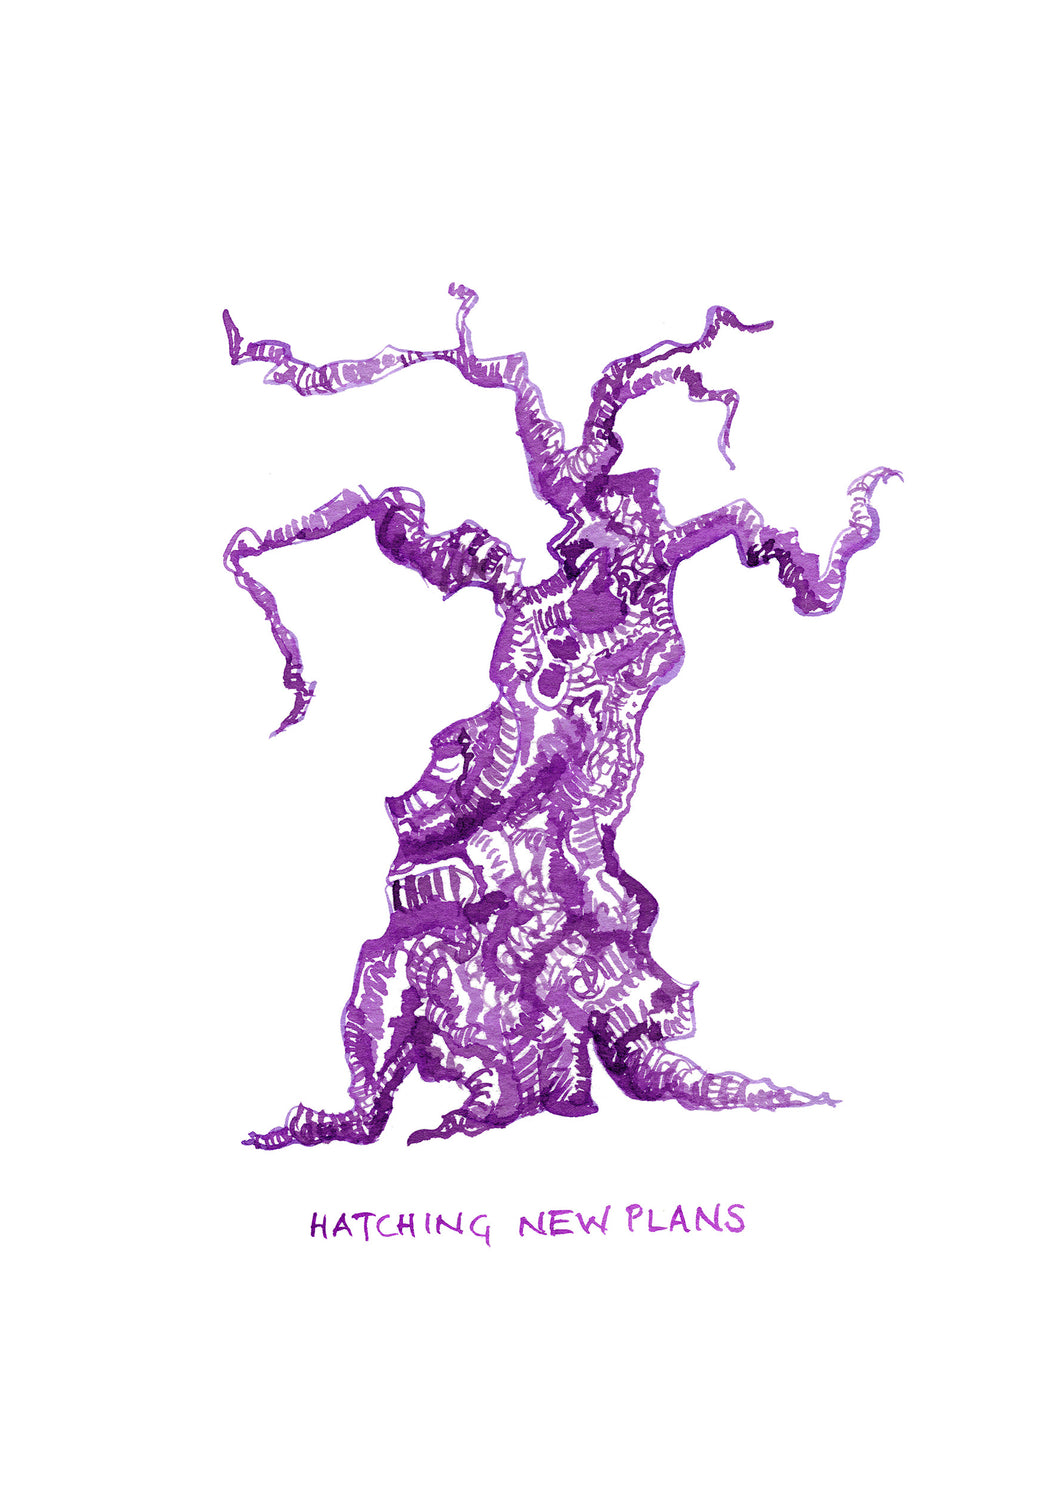 12. Hatching new plans